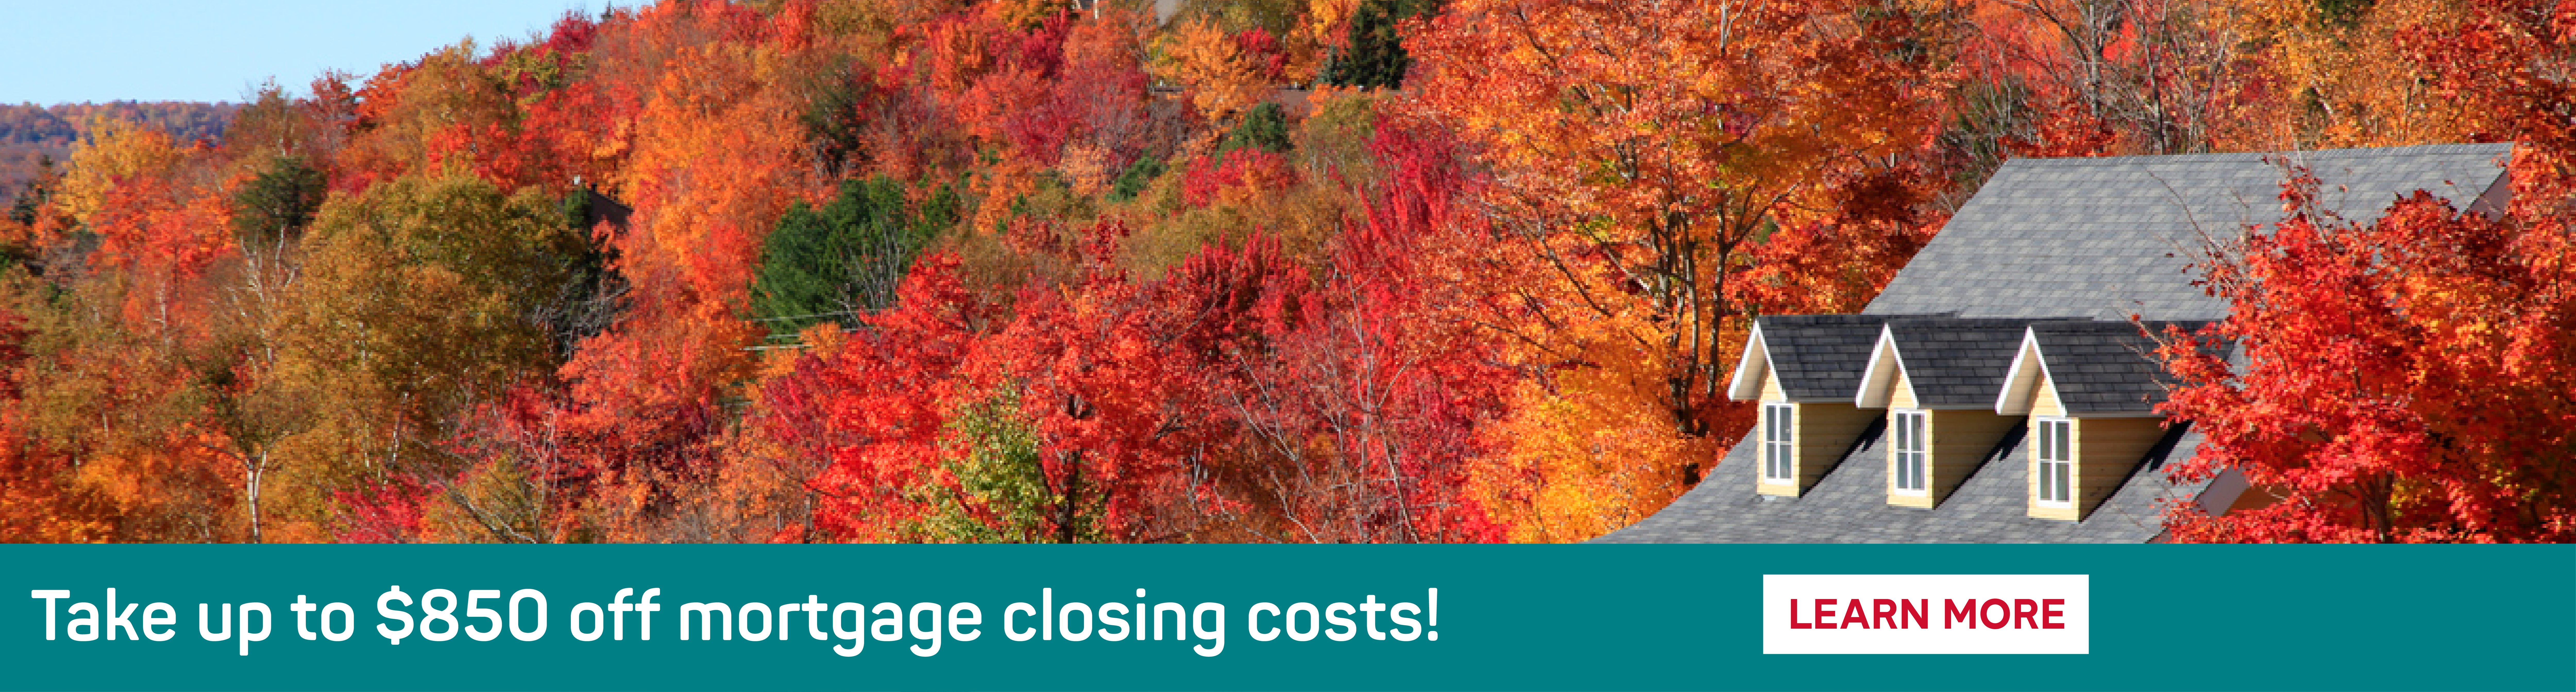 Take up to $850 off mortgage closing costs!